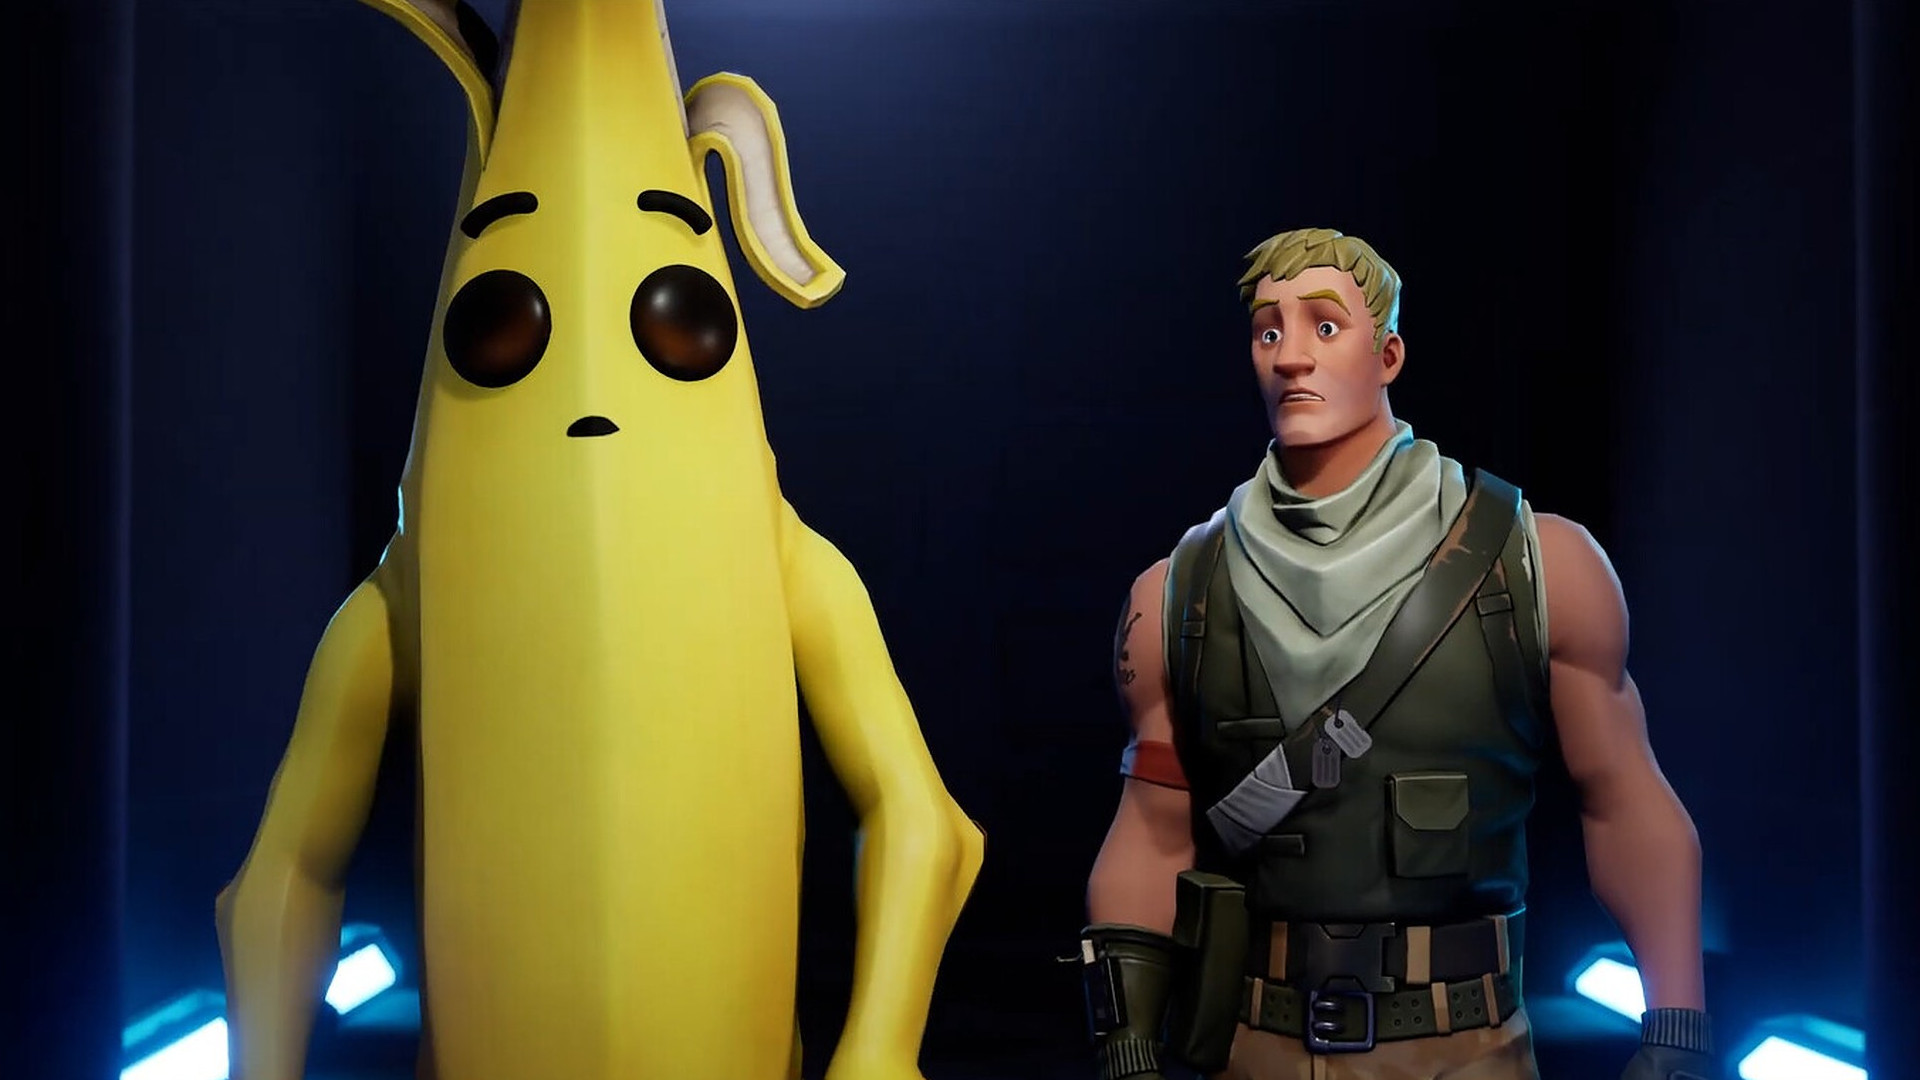 Fortnite: Epic has to pay €230 million for tricking children into spending money